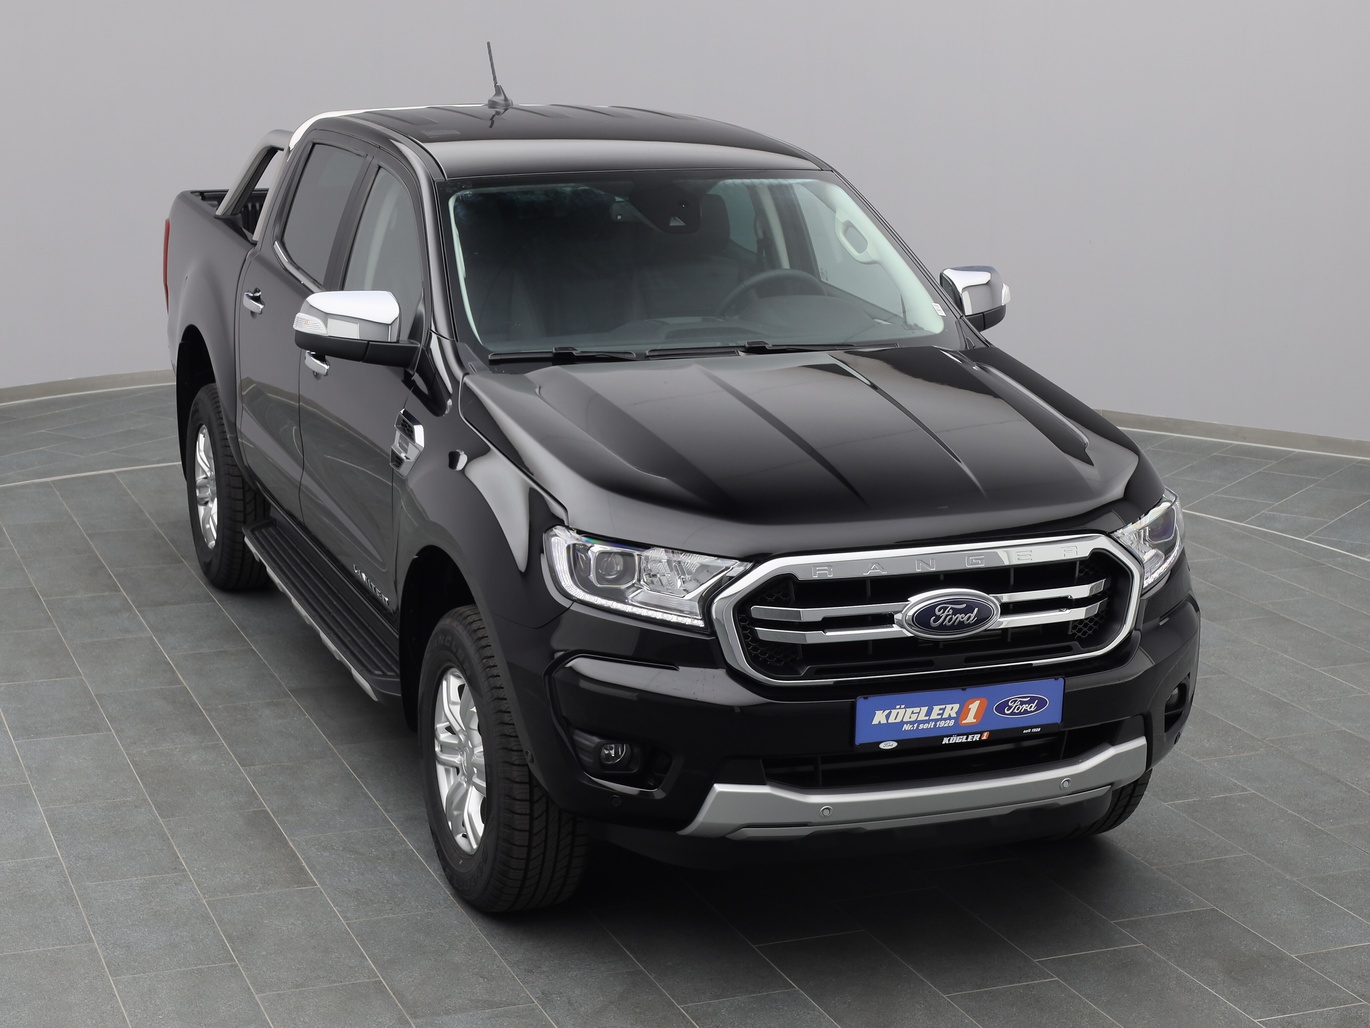  Ford Ranger DoKa Limited 213PS Aut. / AHK / PDC in Agate Black 